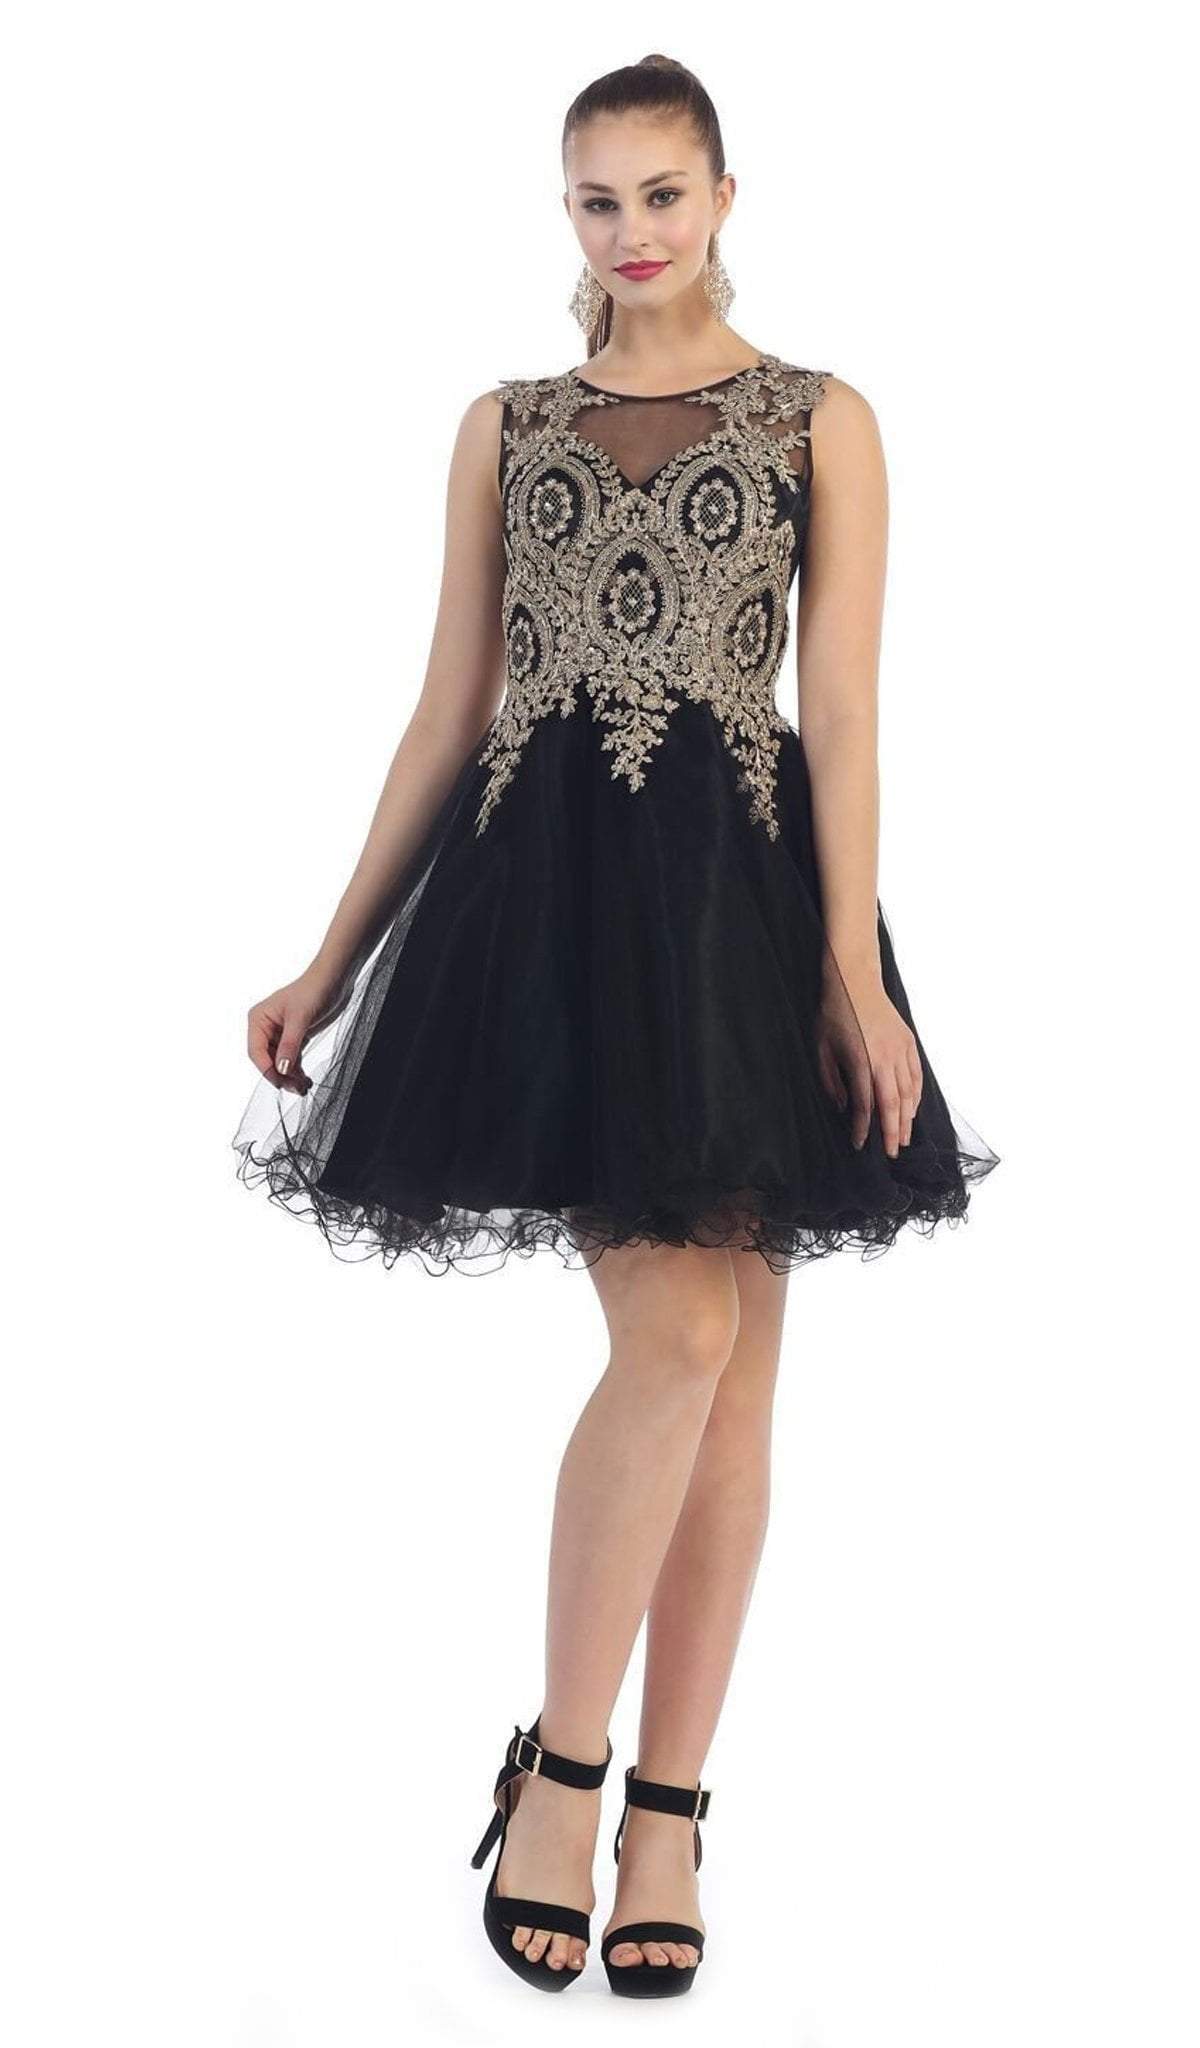 May Queen - Sleeveless Ornate Lace Illusion Cocktail Dress Special Occasion Dress 2 / Black